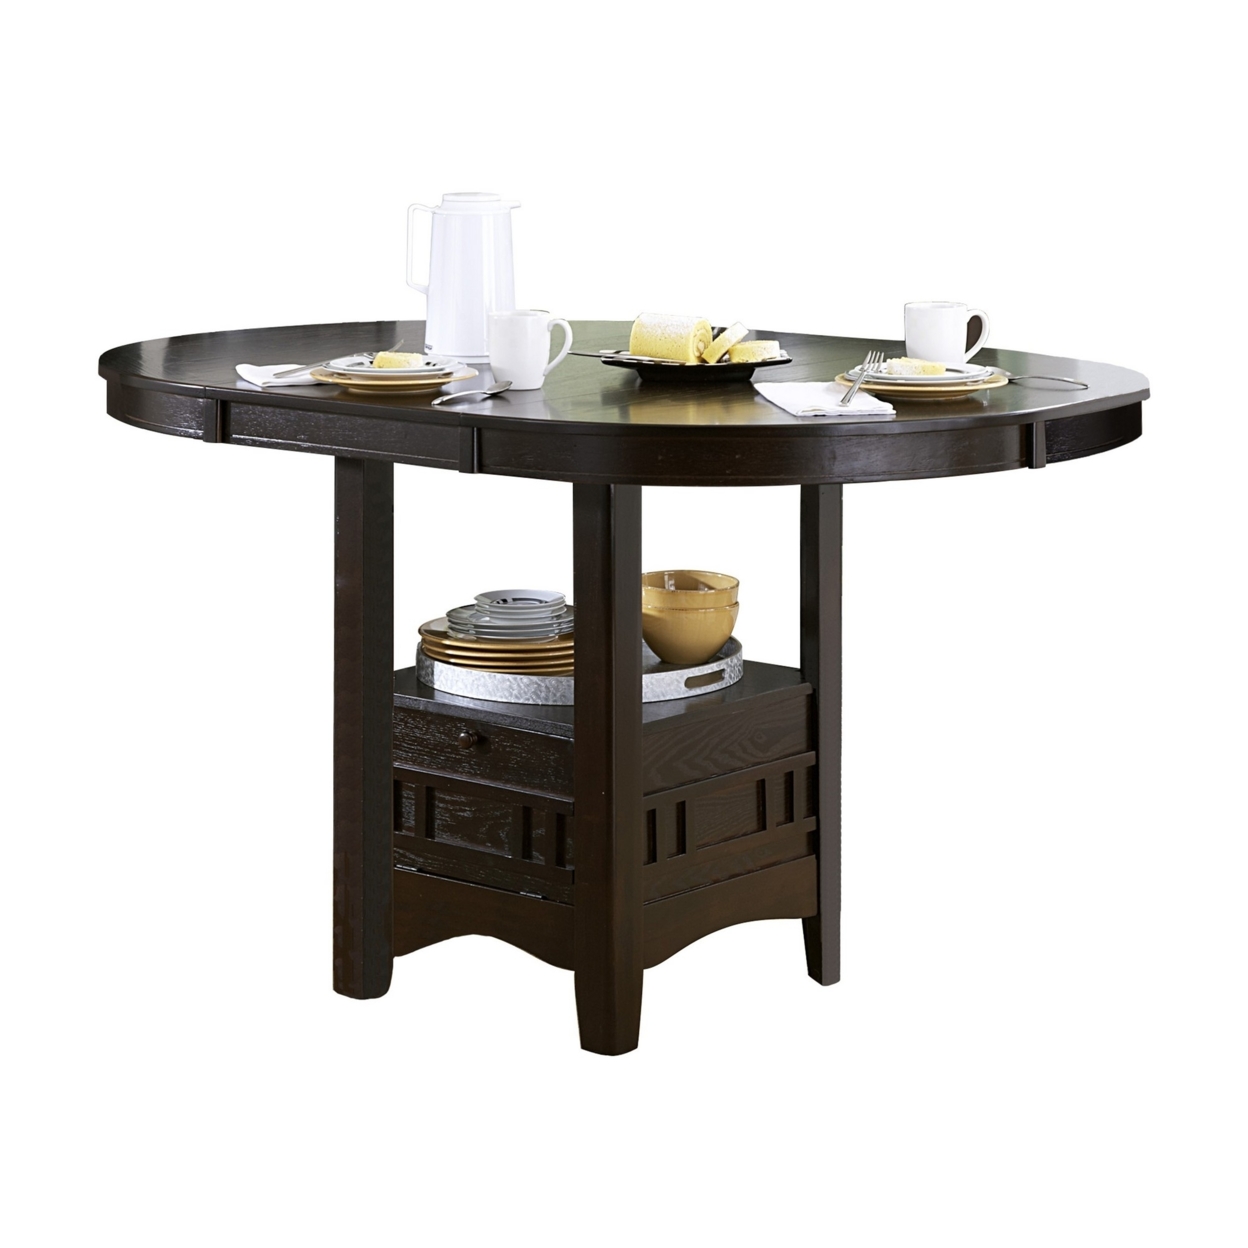 Oval Wooden Counter Height Table With Extension Leaf And Open Shelf, Brown- Saltoro Sherpi